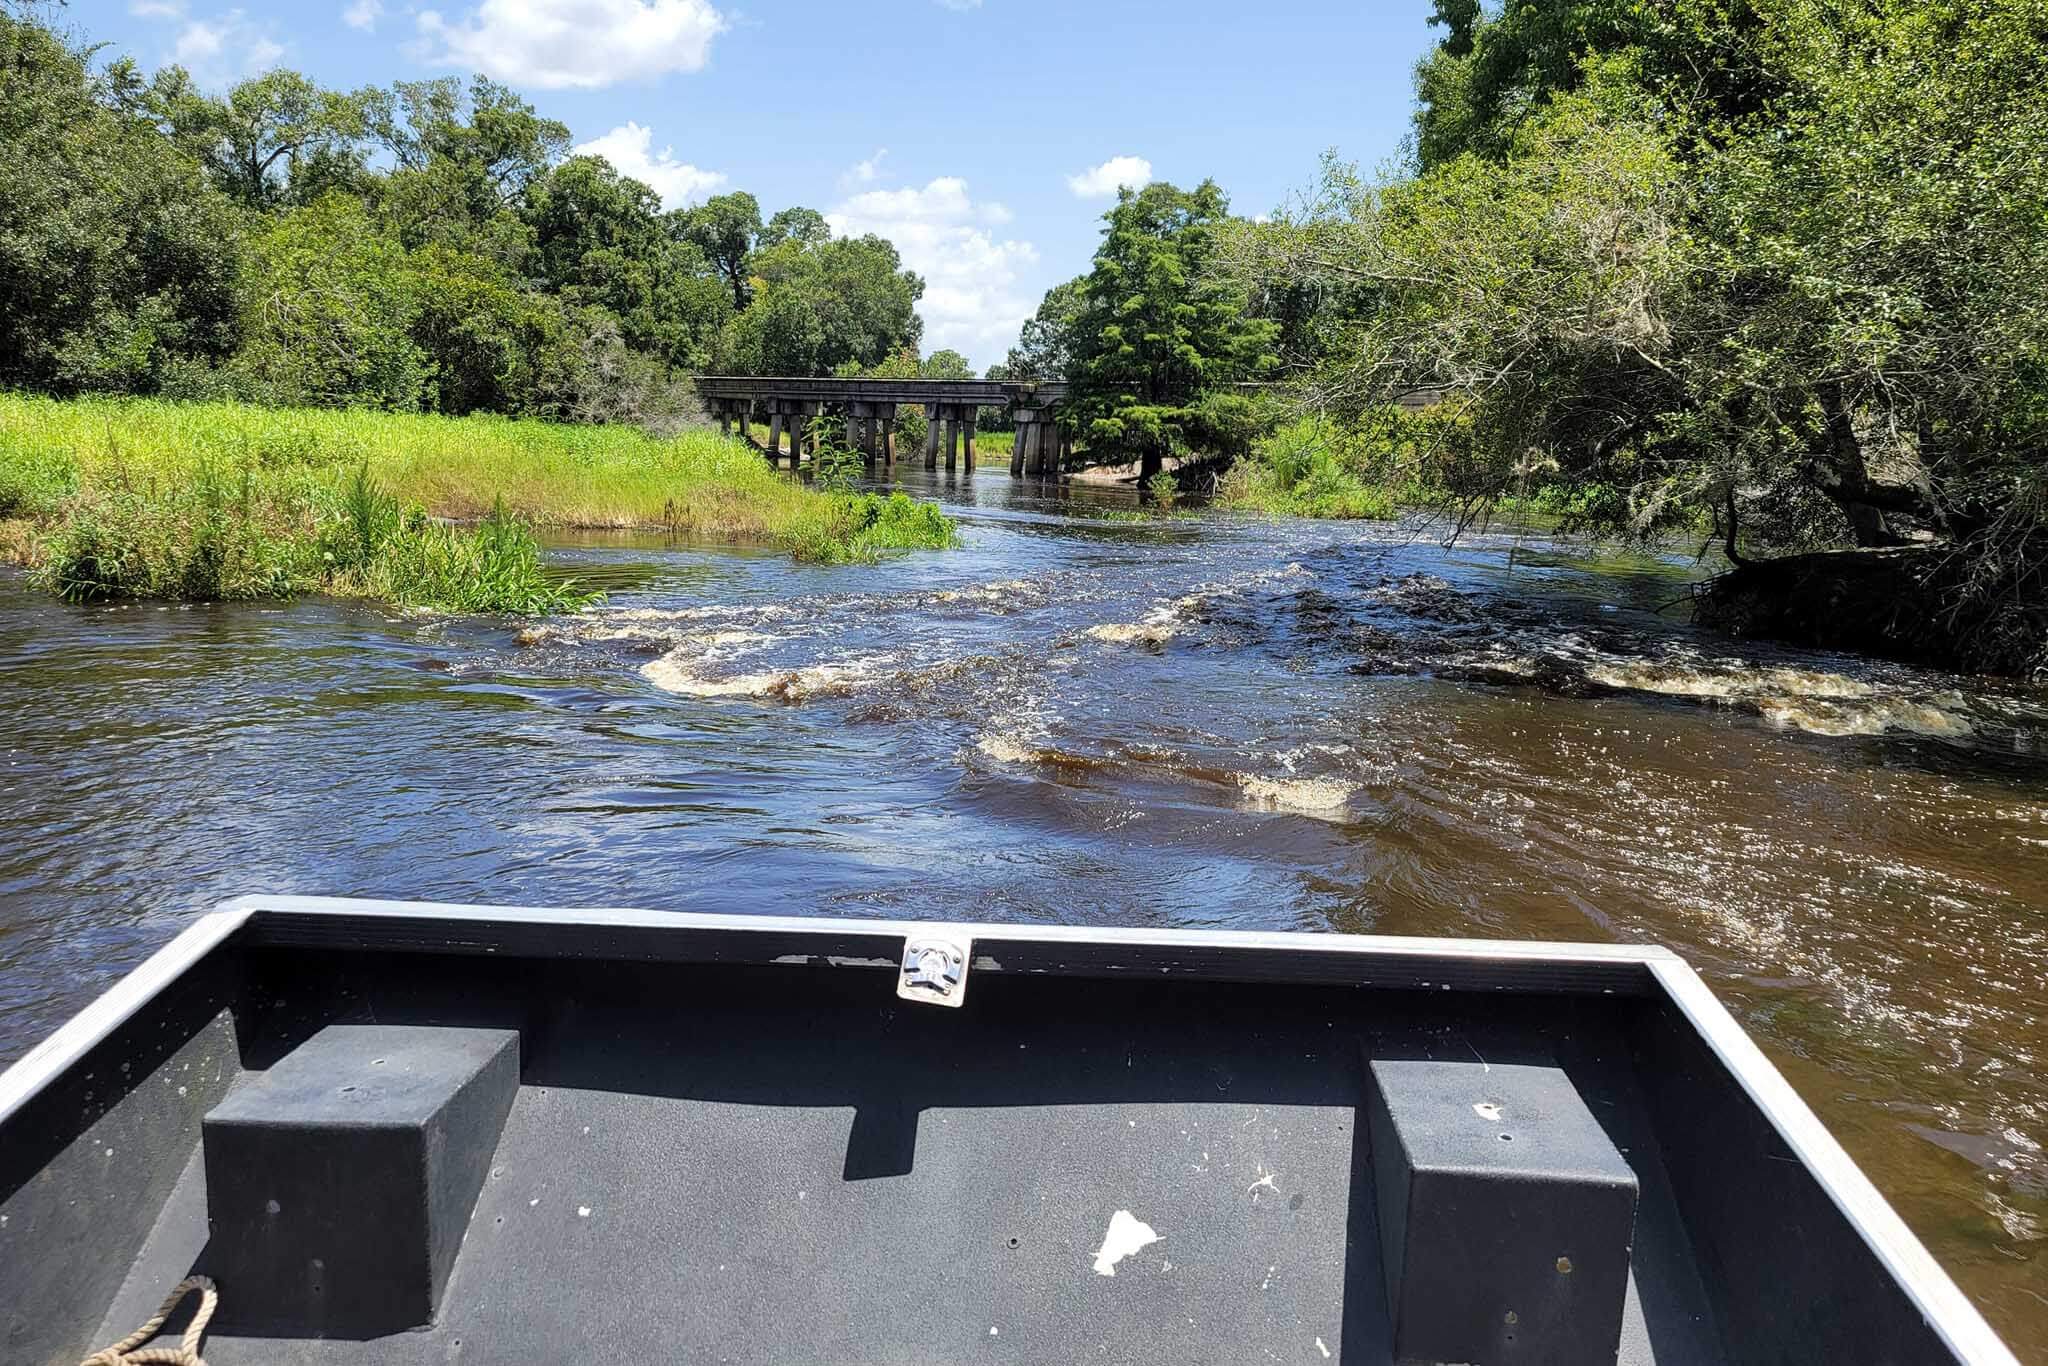 View from the boat on Airboat Wildlife Adventures